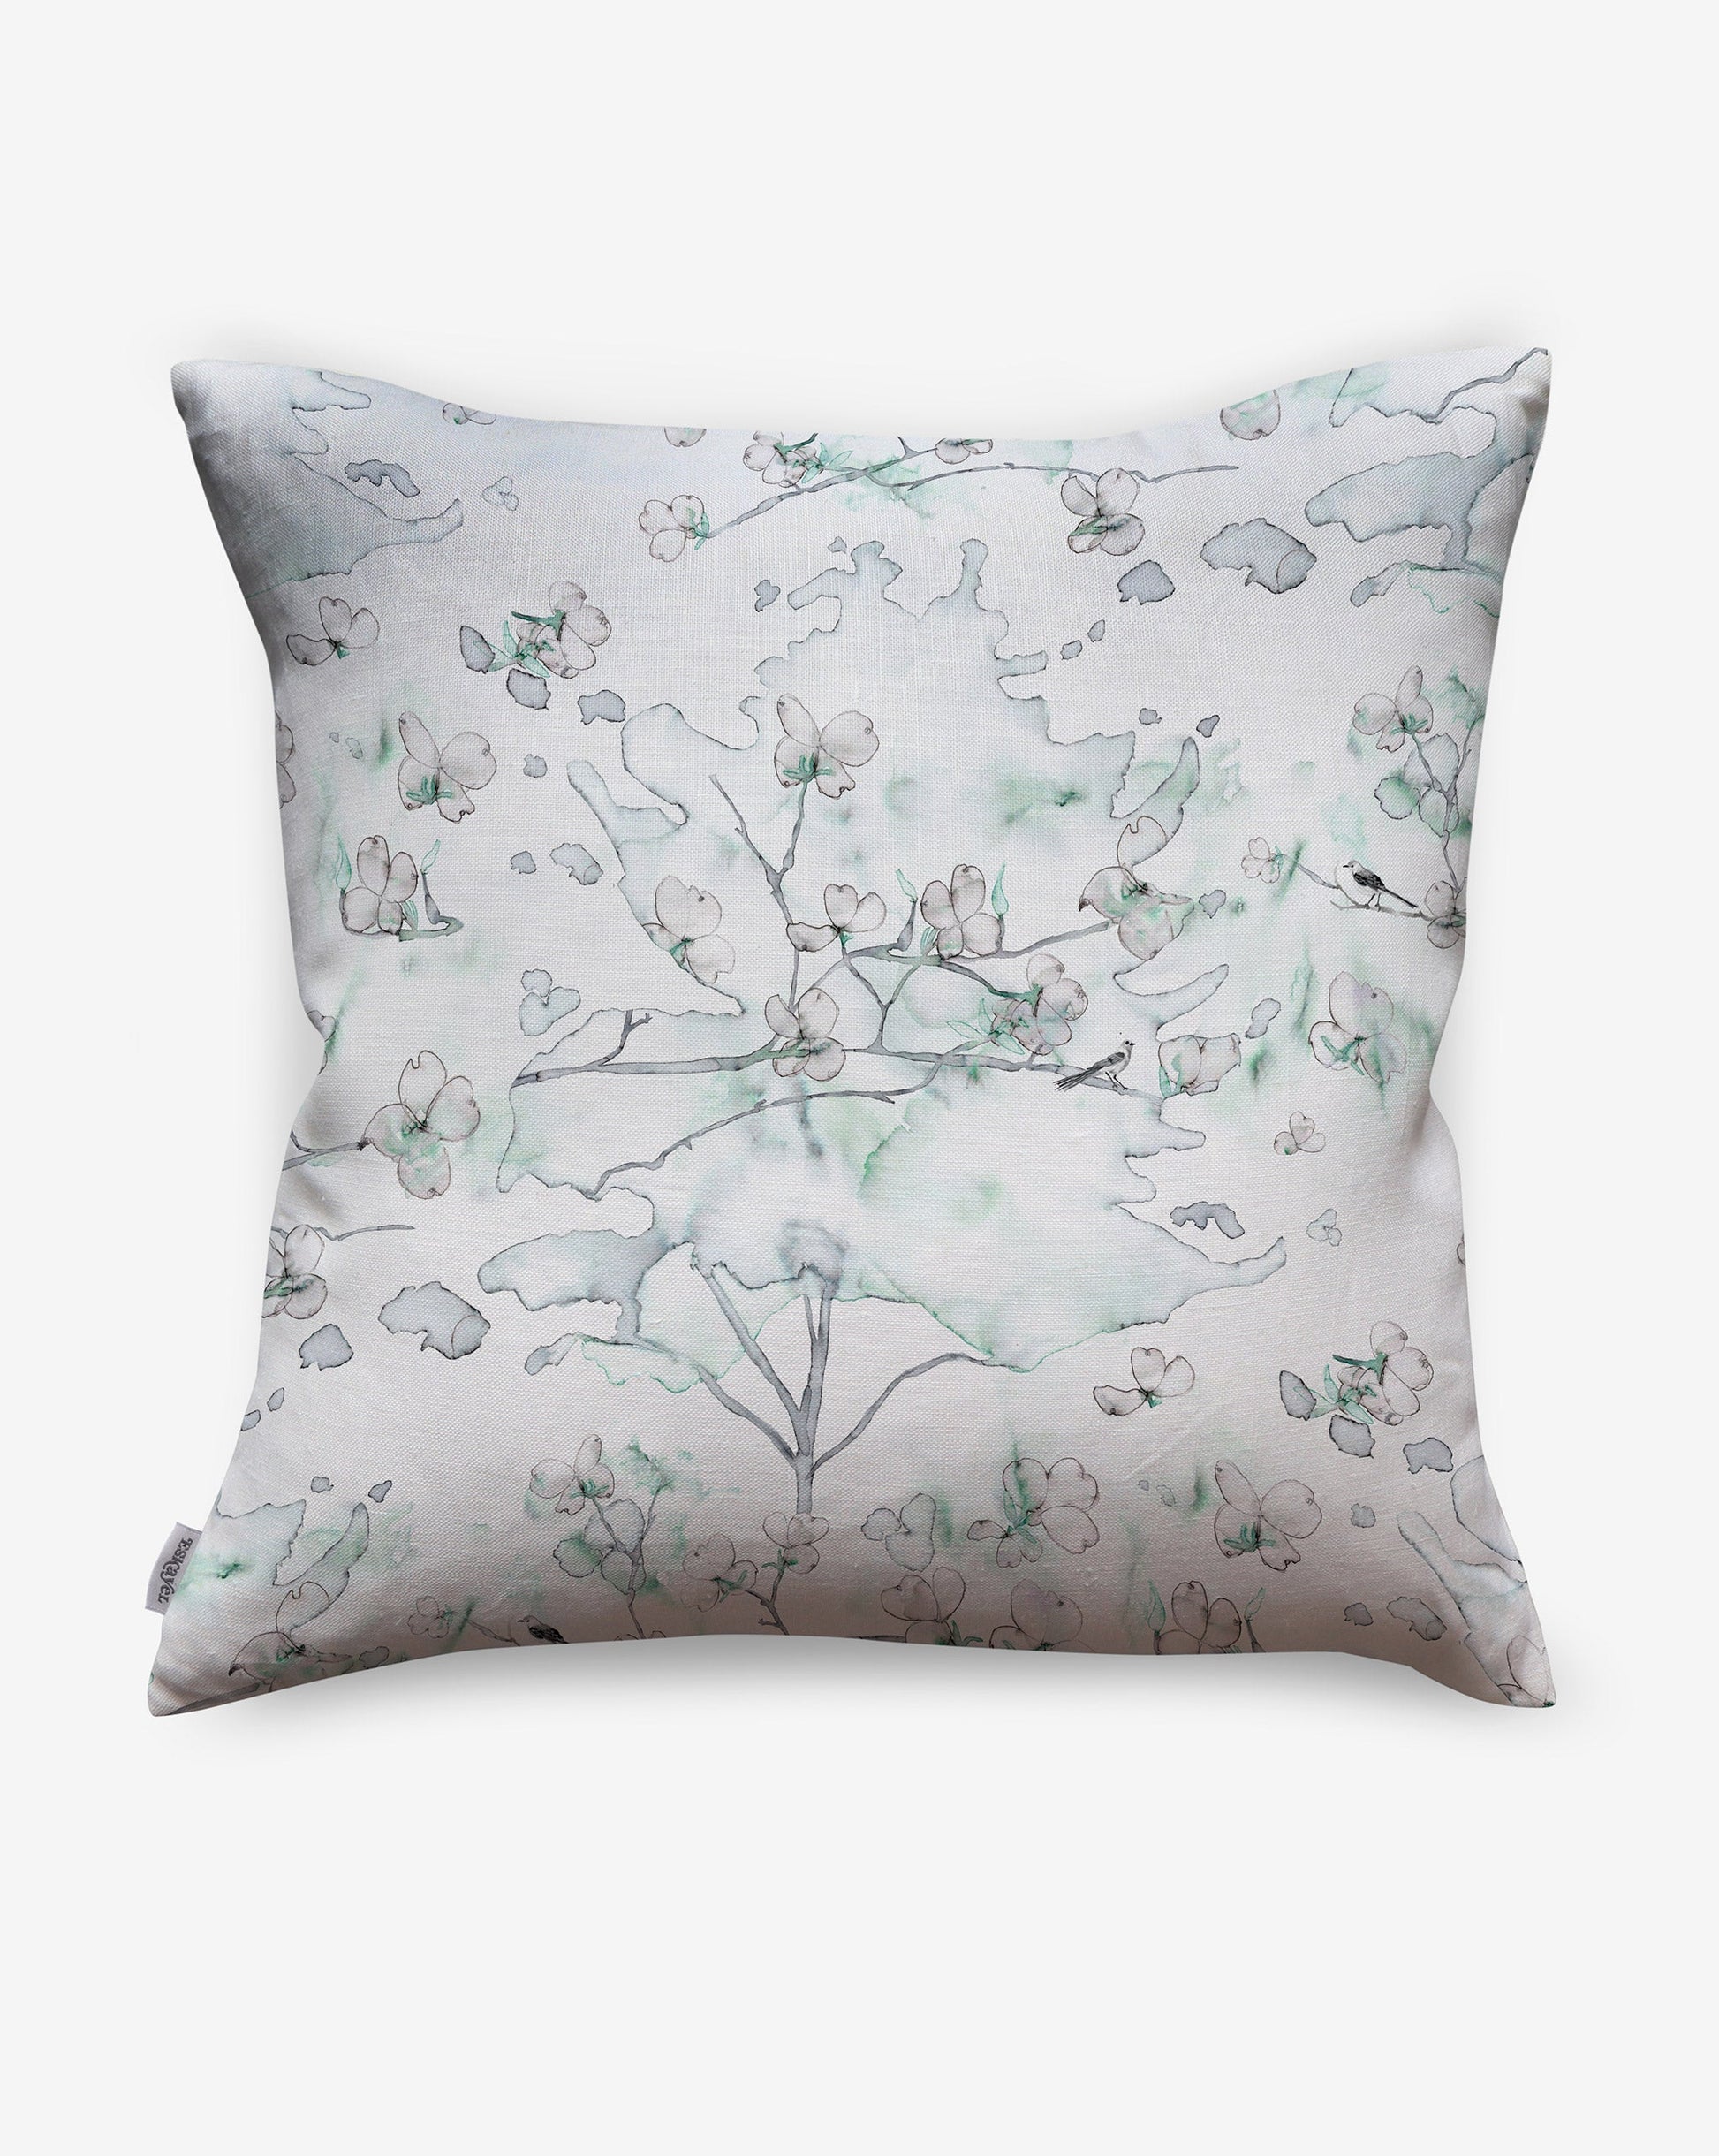 Inspired by nature, Dogwood Dreams pillows in Spruce feature shades of greens, blues, and pinks.